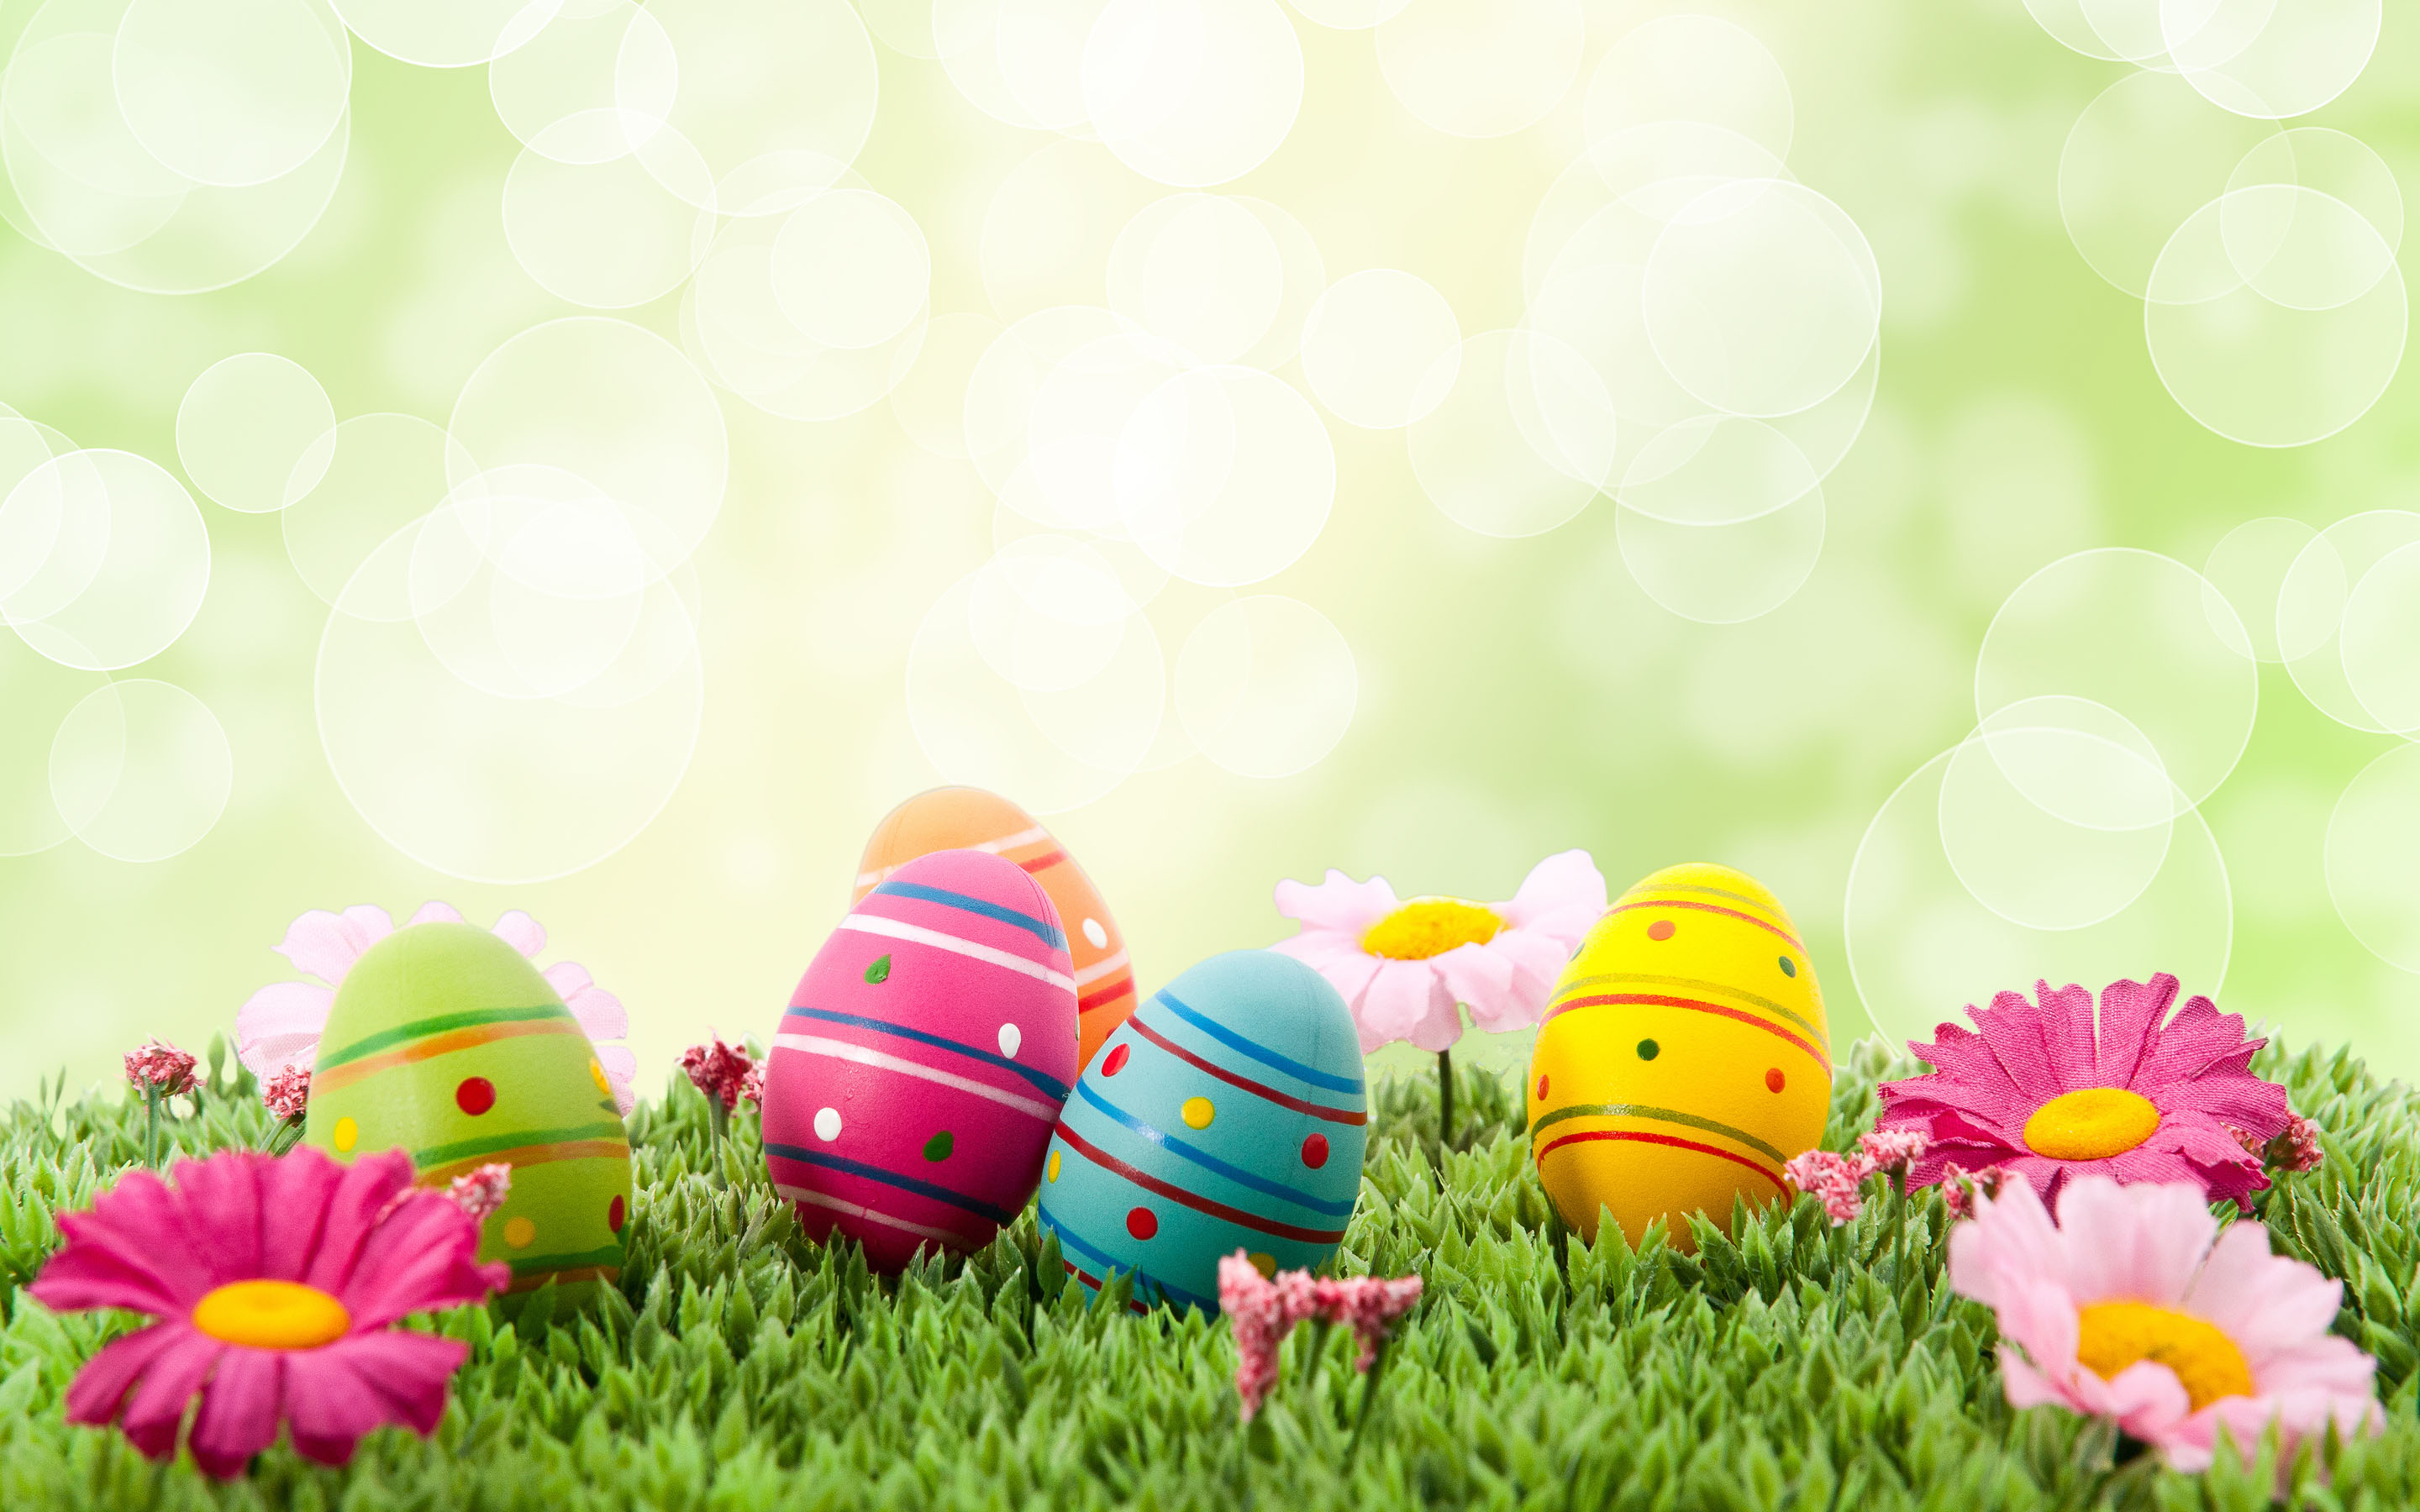 Happy Easter Wallpaper Background Image